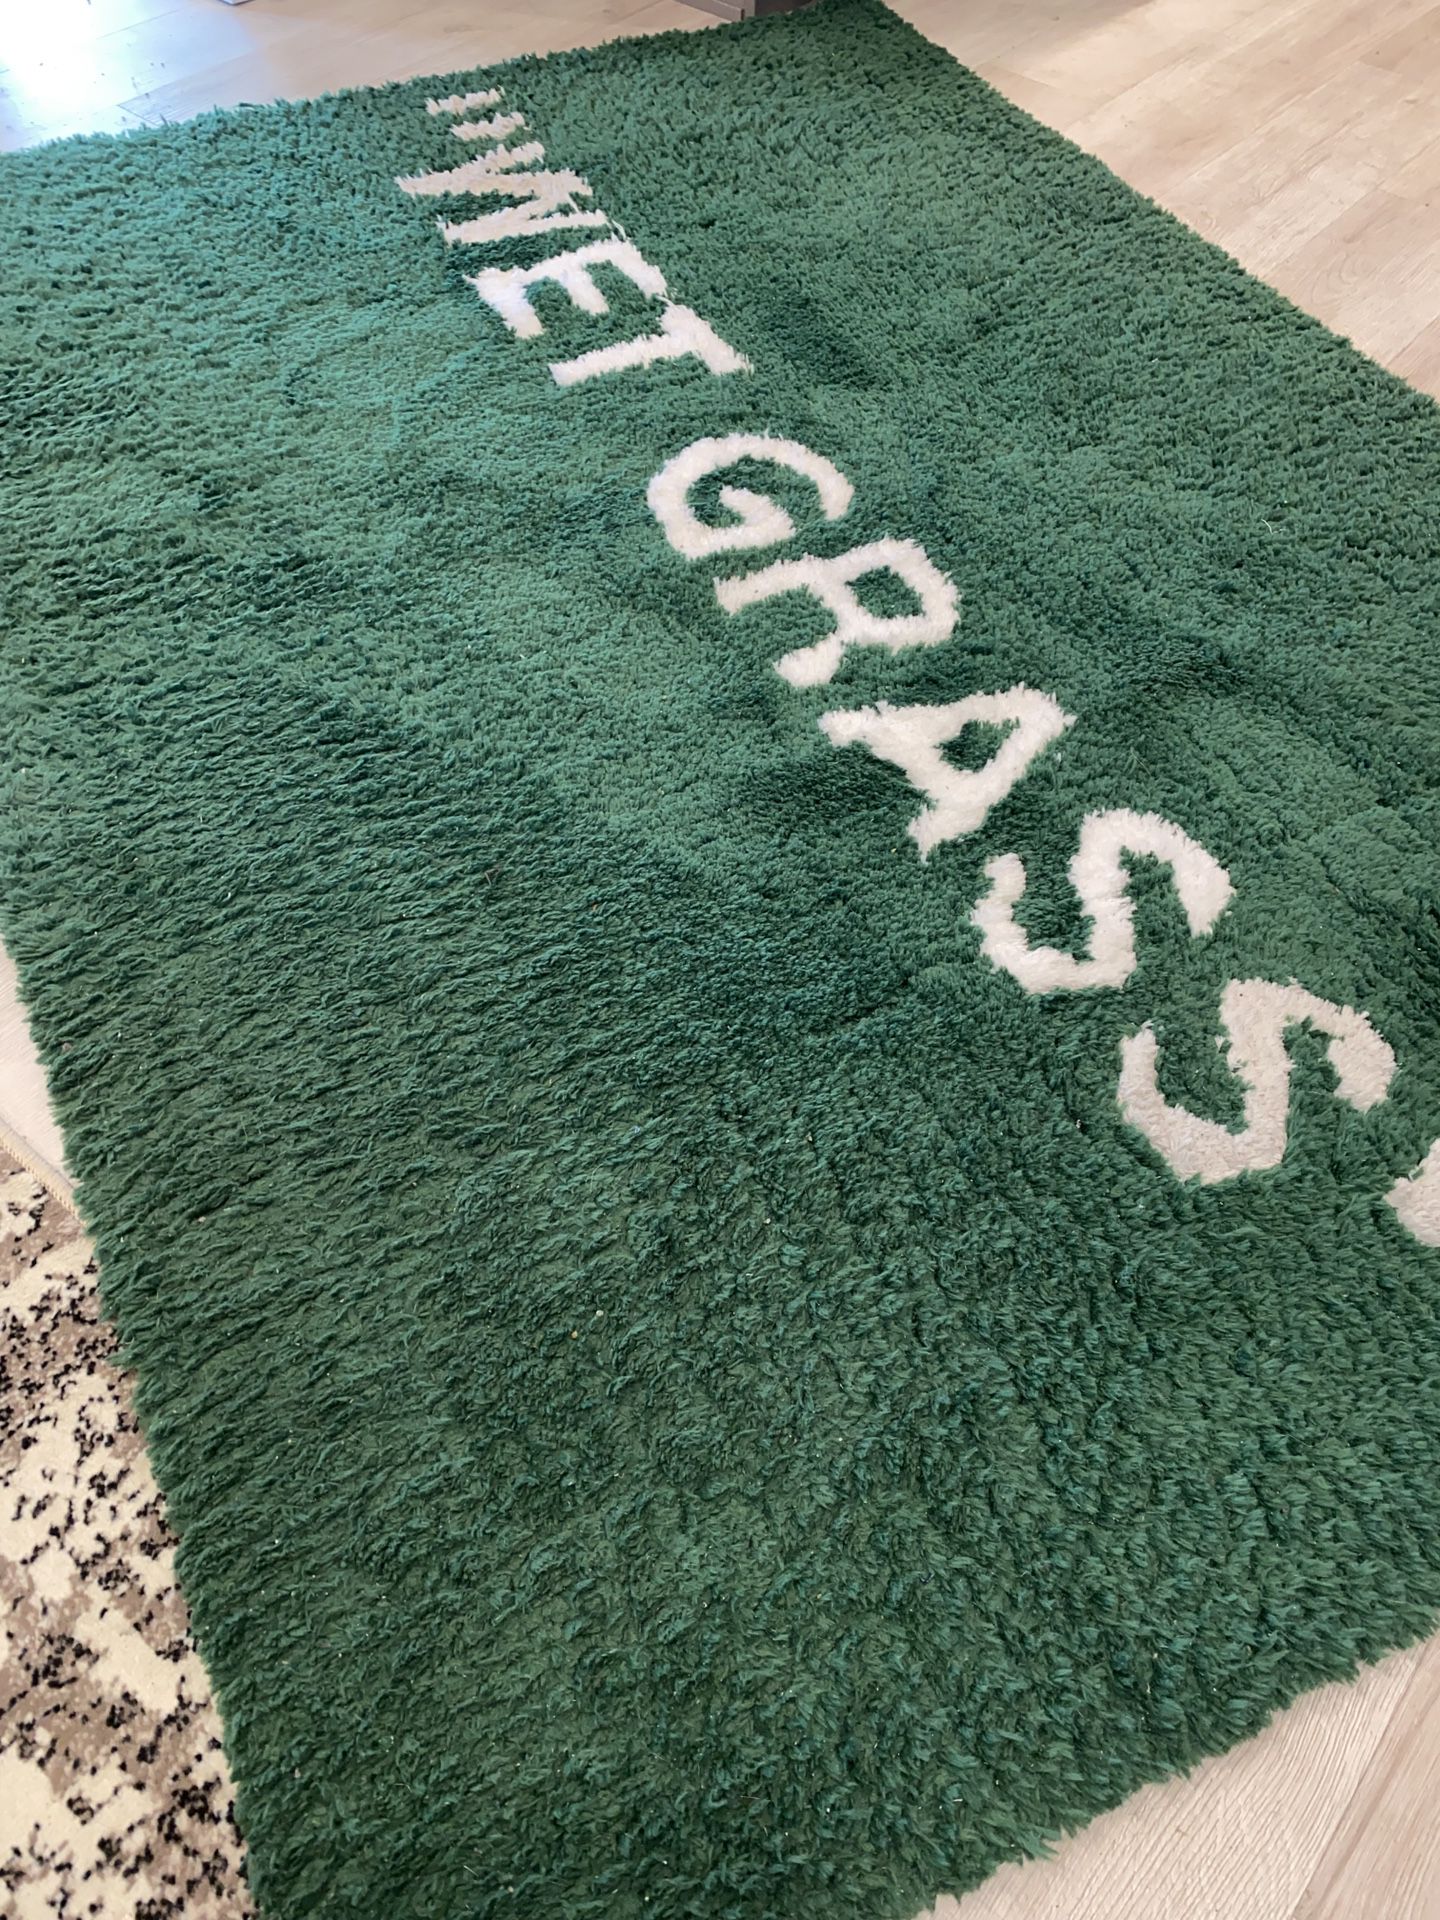 Off white wet grass rug for sale! GTA area : r/SneakersCanada